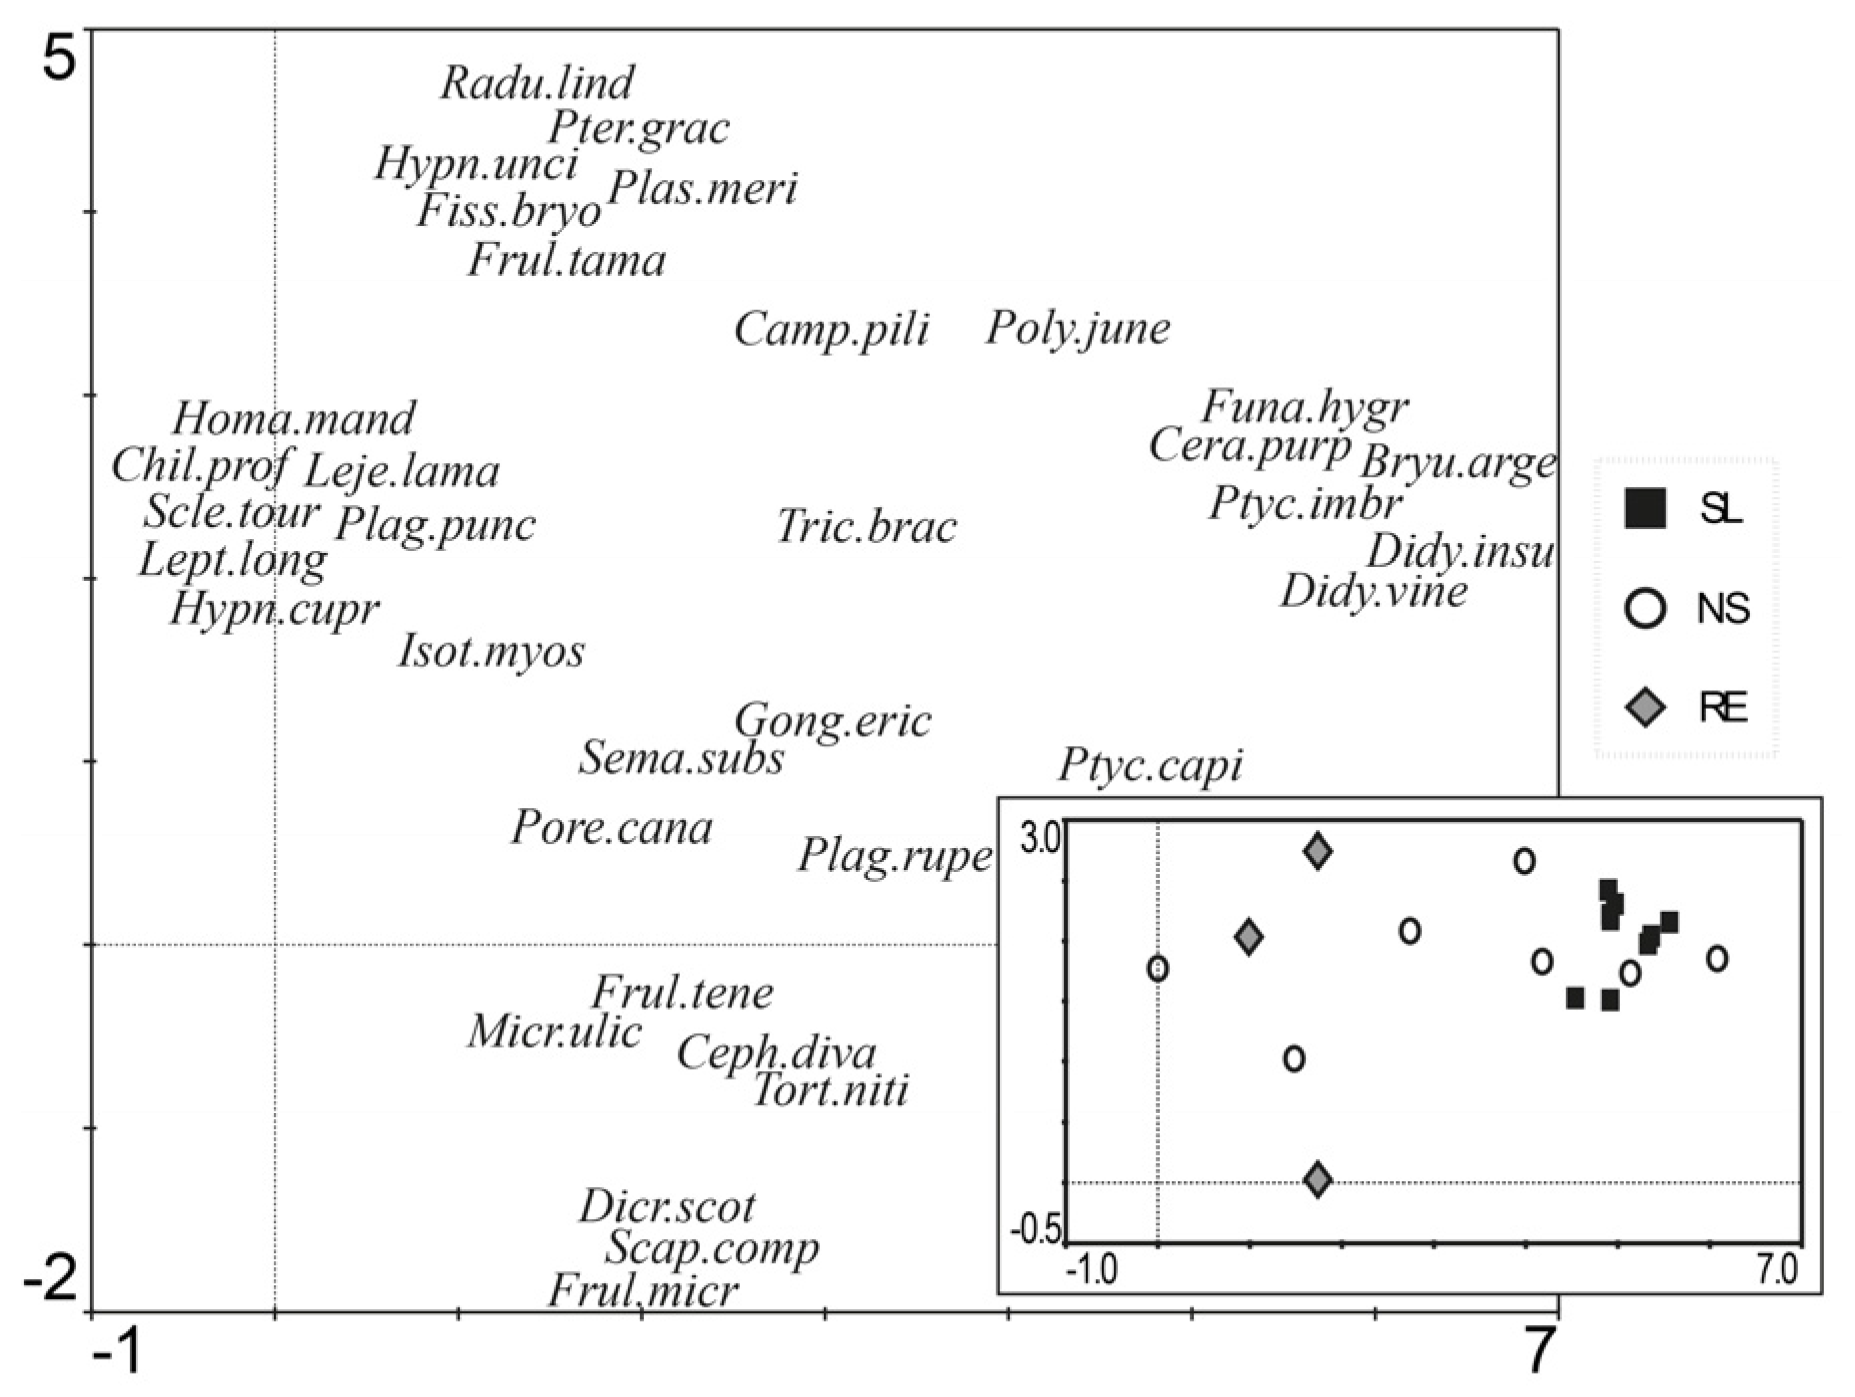 Forests | Free Full-Text | Post-Fire Salvage Logging Imposes a New Disturbance that Retards Succession: The Case of Bryophyte Communities in a Macaronesian Forest | HTML